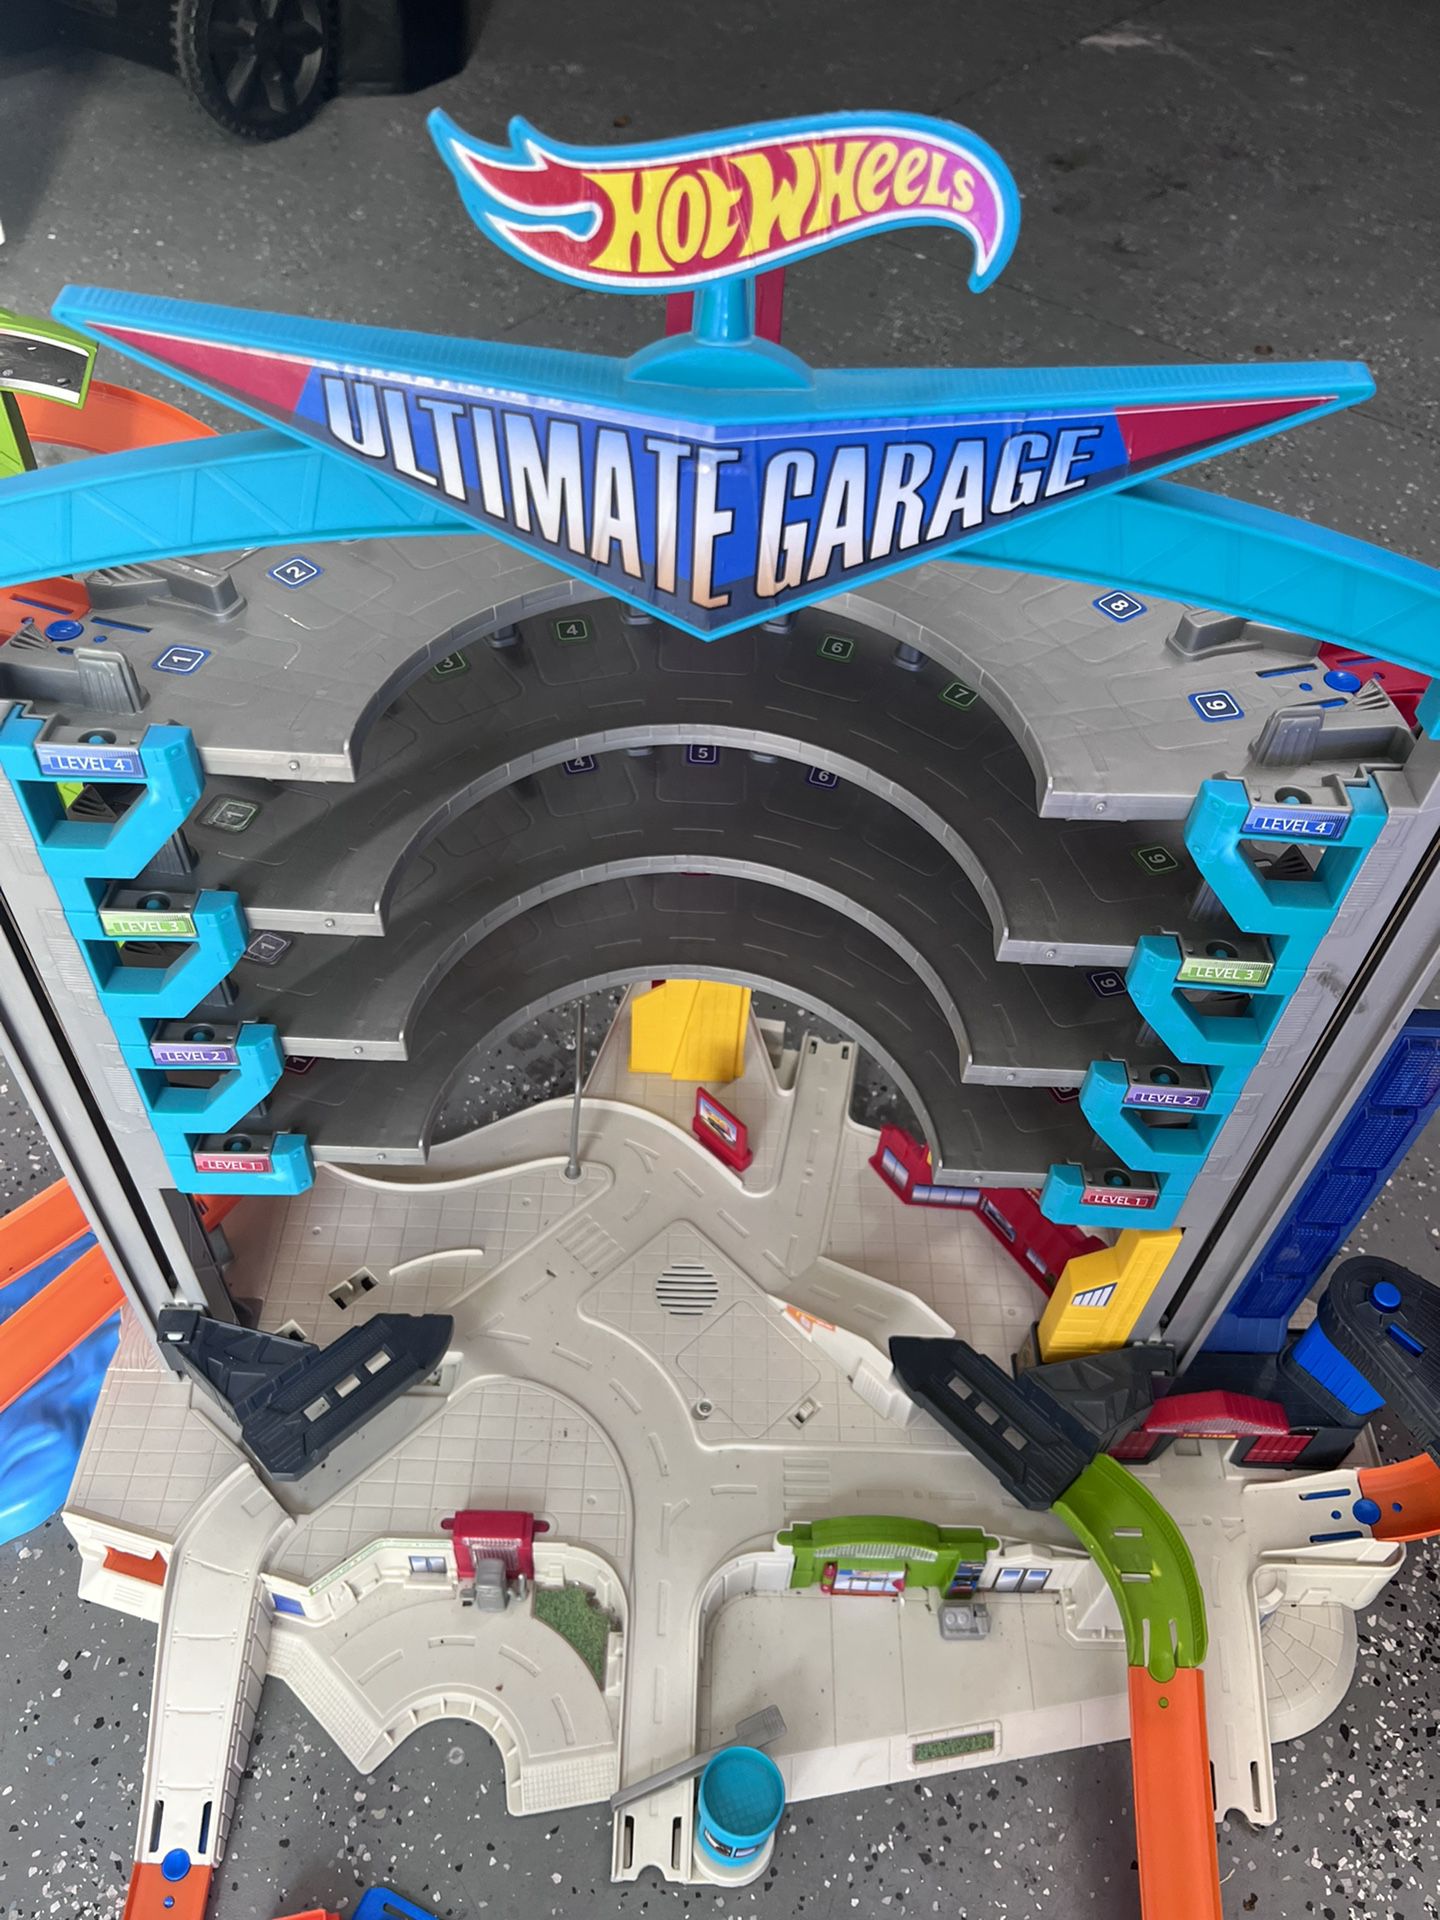 Hot Wheels Ultimate Garage - Toy Reviews 2016